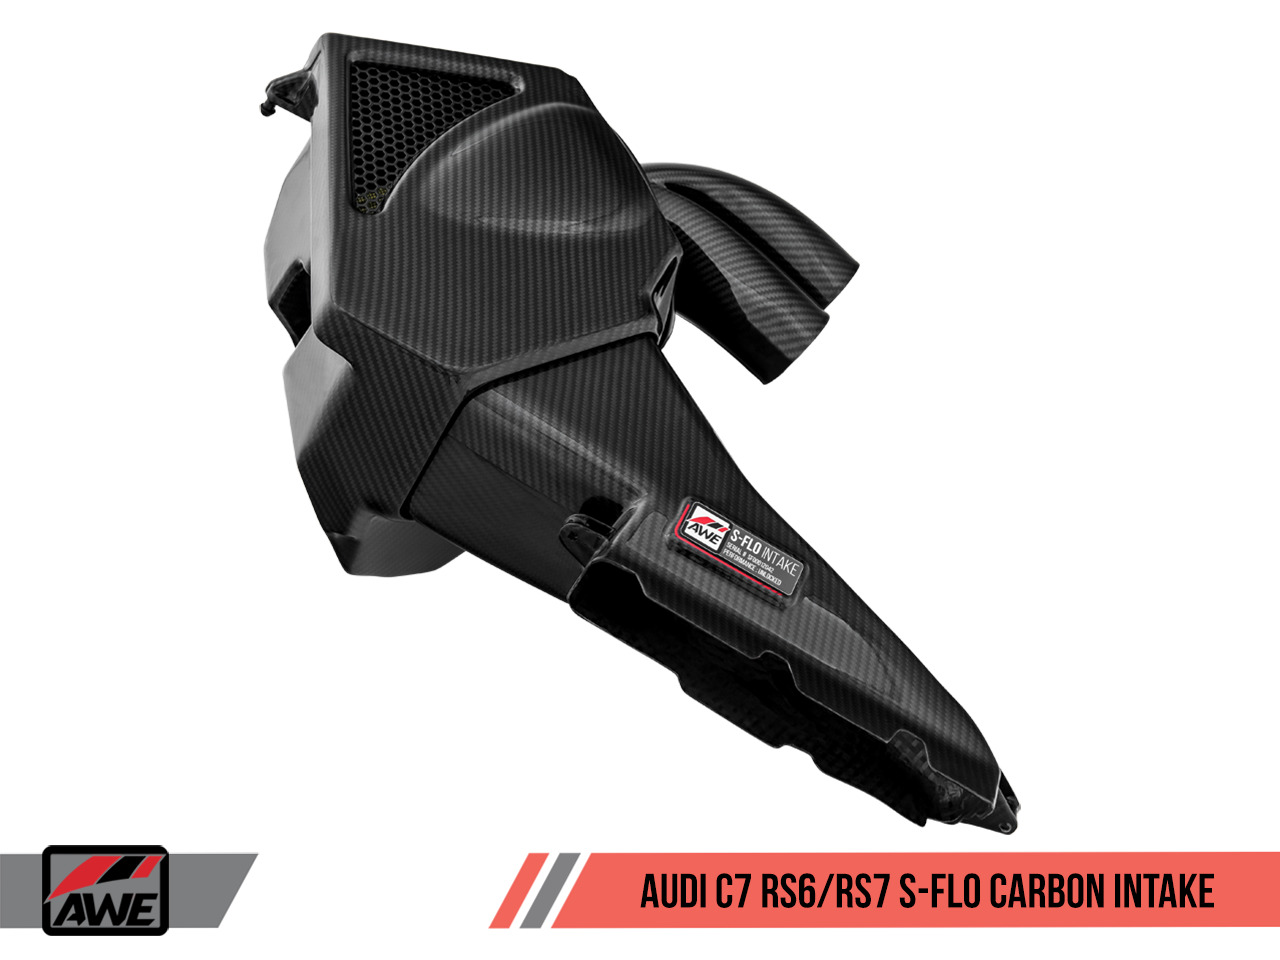 AWE Tuning S-FLO Carbon Intake V2 for Audi C7 RS6 / RS7 4.0T